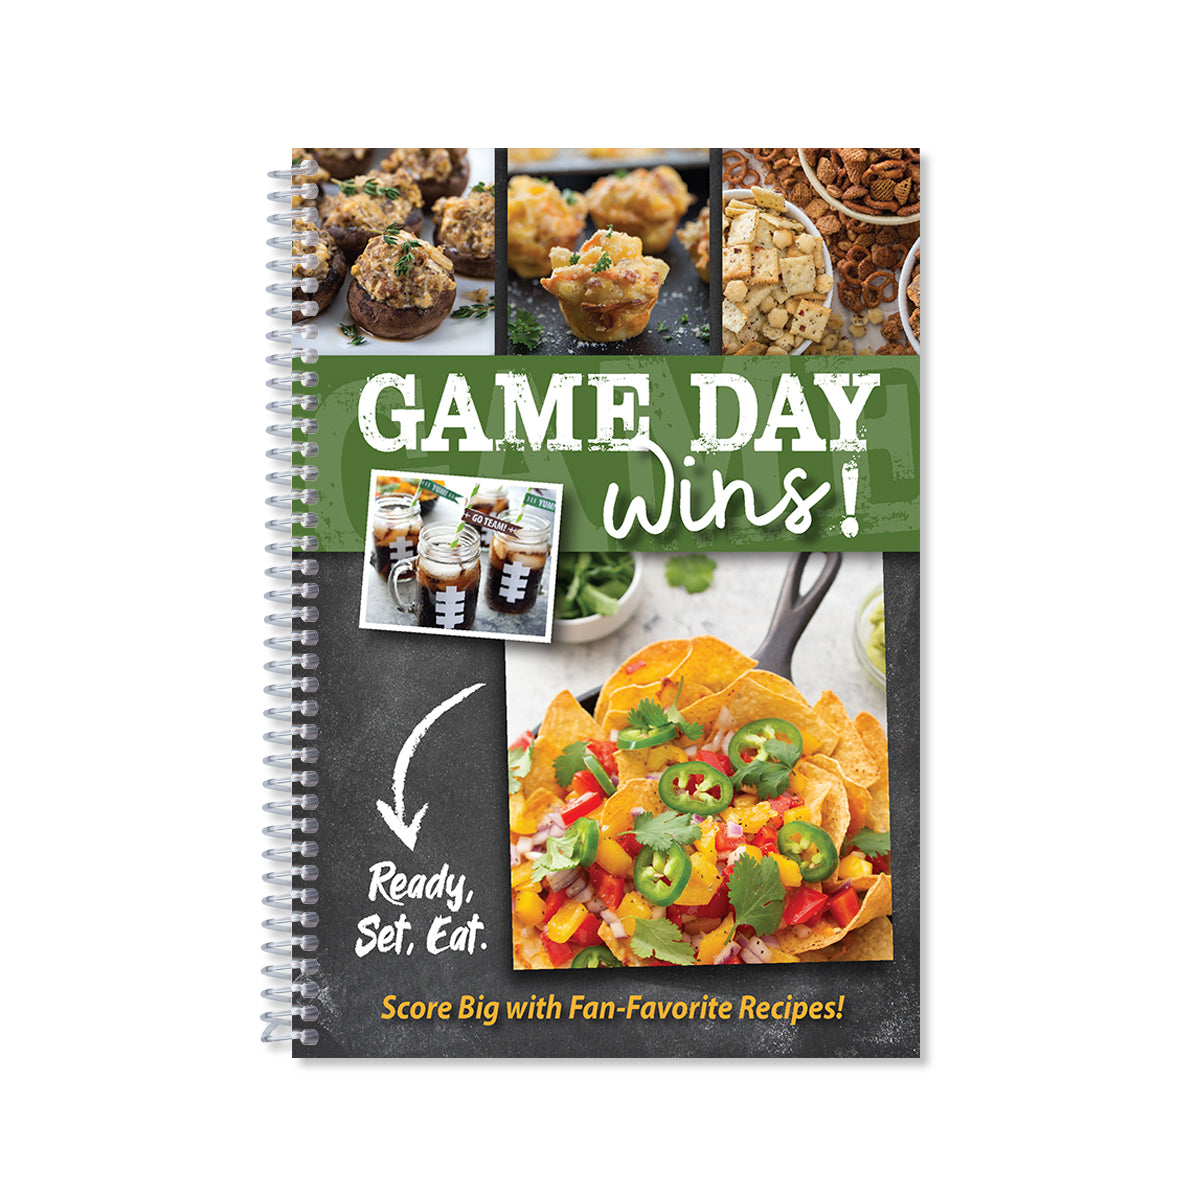 Game Day Wins. Ready, Set, Eat. Cookbook with fan-favorite recipes.